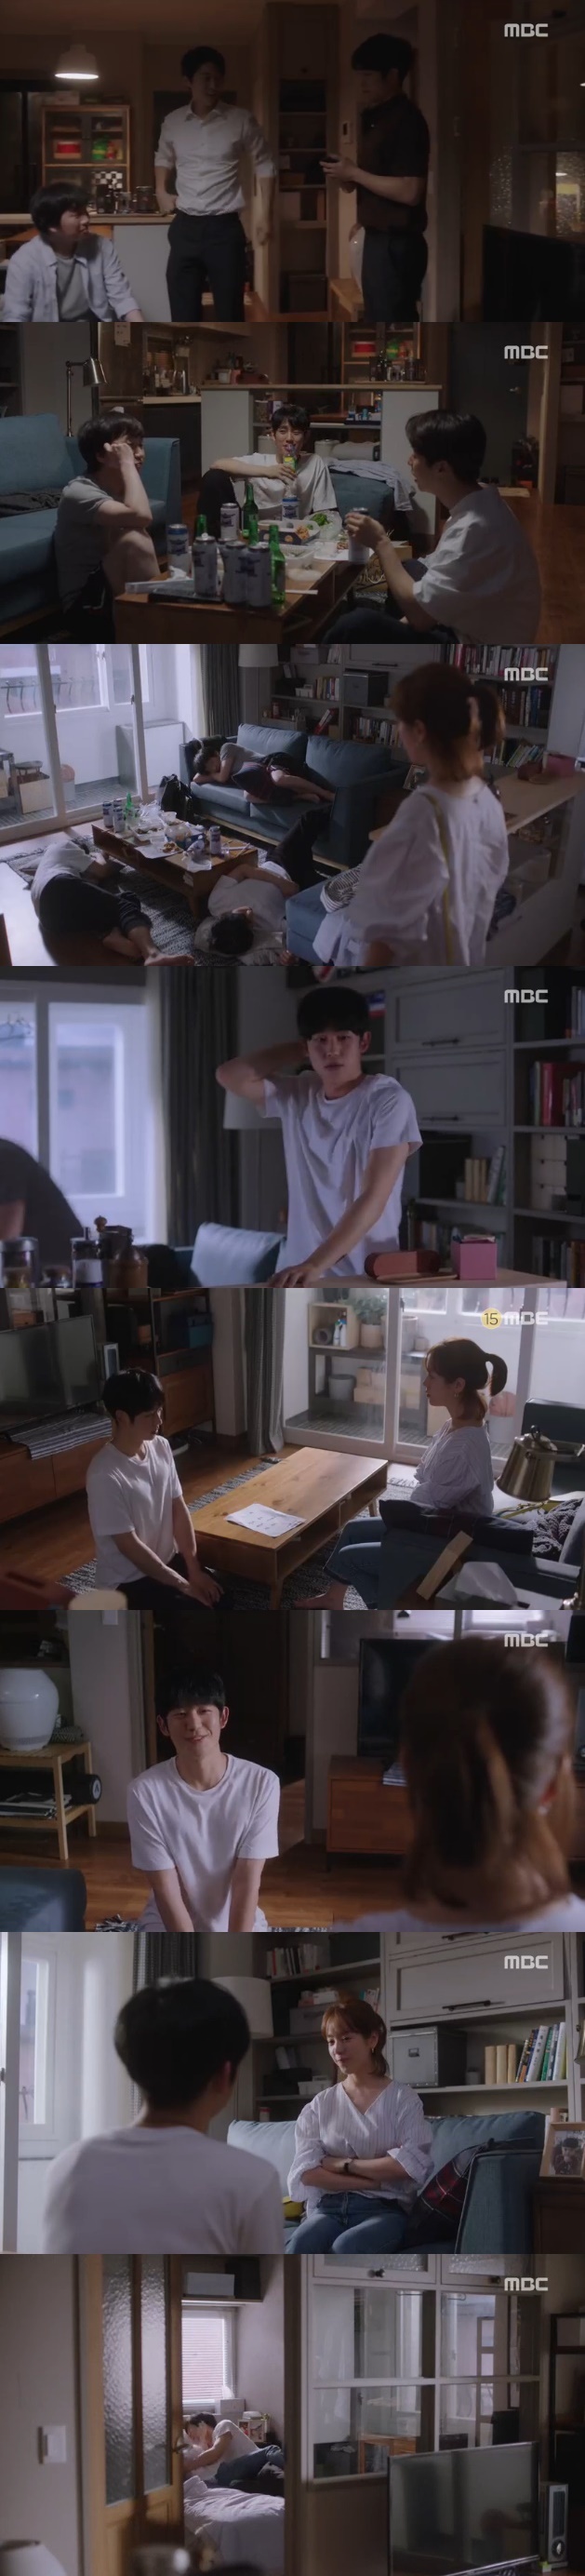 Seoul = = Spring Night Jung Hae-in and Han Ji-min showed a good appearance until the end.In the last episode of MBCs drama Spring Night, which was broadcast on the afternoon of the 11th, Yoo Ji-Ho (Jeong Hae-in) and Lee Choi Jung-in (Han Ji-min) made the viewers happy with the Memorandum of Understanding.Earlier, when Yoo Ji-Ho made a mistake in drunkenness, Choi Jung-in asked him to write a memorandum of abstinence by holding out the paper.Yoo Ji-Ho panicked and said, I dont do it, man can make mistakes. How human.I have to look at it once, is not it too inhumane to do this on a single knife?But Lee Jung-in said, Theres a lot of real talk. I have a drinking clinic at the health center. I only drink once a month.Yoo Ji-Ho said, Its ridiculous. He sighed, I understand, I do not drink.The memorandum was absolutely abstaining from marriage to Choi Jung-in in case of violation. Yoo Ji-Ho eventually caught the eye by blocking the memorandum.Afterwards, Yoo Ji-Ho was teased by Friends, saying, I live in a house by Choi Jung-in. Friends were asked to have a drink at Yoo Ji-Hos house.Yoo Ji-Ho contacted Lee Jung-in and lied, Friends are gone, good night, I love you.The operation to drink seemed to be successful, but a colleague of Choi Jung-in, who lives in the same building, said, Mr. Jiho, do you have houses today?Everything was revealed by sending a message to Choi Jung-in.The next morning, I found Choi Jung-in, who visited Yoo Ji-Hos house, and Yoo Ji-Ho and Friends who were drunk and overslept.Yoo Ji-Ho jumped up and said, Mr. Choi Jung-in is so late.Lee Jung-in took a memorandum attached to the fridge, which Yoo Ji-Ho begged, saying he was wrong.And Yoo Ji-Ho, who kneeled down, said, Do you want to marry me? I said I did not drink even if I died, but the children kept doing it.Youre cowardly, Ill tell you I dont want to get married, do you even use this method, Lee Jung-in continued.Yoo Ji-Ho started to be charming, saying, Im sick of my stomach. He also said, Yes to the story Did you think you could cheat to the end?Choi Jung-in, who laughed at the charm of Yoo Ji-Ho, said, I know and said, I do not get married.Lee Jung-in ran away with a memorandum, and Yoo Ji-Ho chased him to show off his al-Kondalkong skinship; the two kissed and confirmed their love once more.At the end of the broadcast, the contents of the memorandum of Yoo Ji-Ho and Choi Jung-in changed.The memorandum of Yoo Ji-Ho was changed to Do not lie rather than this week, and this Choi Jung-in memorandum must marry Yoo Ji-Ho.It is a virgin ghost in violation, he added, adding to the smile.On the other hand, Spring Night is a romance drama about the process of loving two people who accidentally encountered each other in a pharmacy in spring. It was broadcast on May 22 and received great love.Following the Spring Night, New Entrepreneur Koo Hae-ryong starring Cha Eun-woo and Shin Se-kyung will be broadcasted for the first time at 8:55 pm on the 17th.